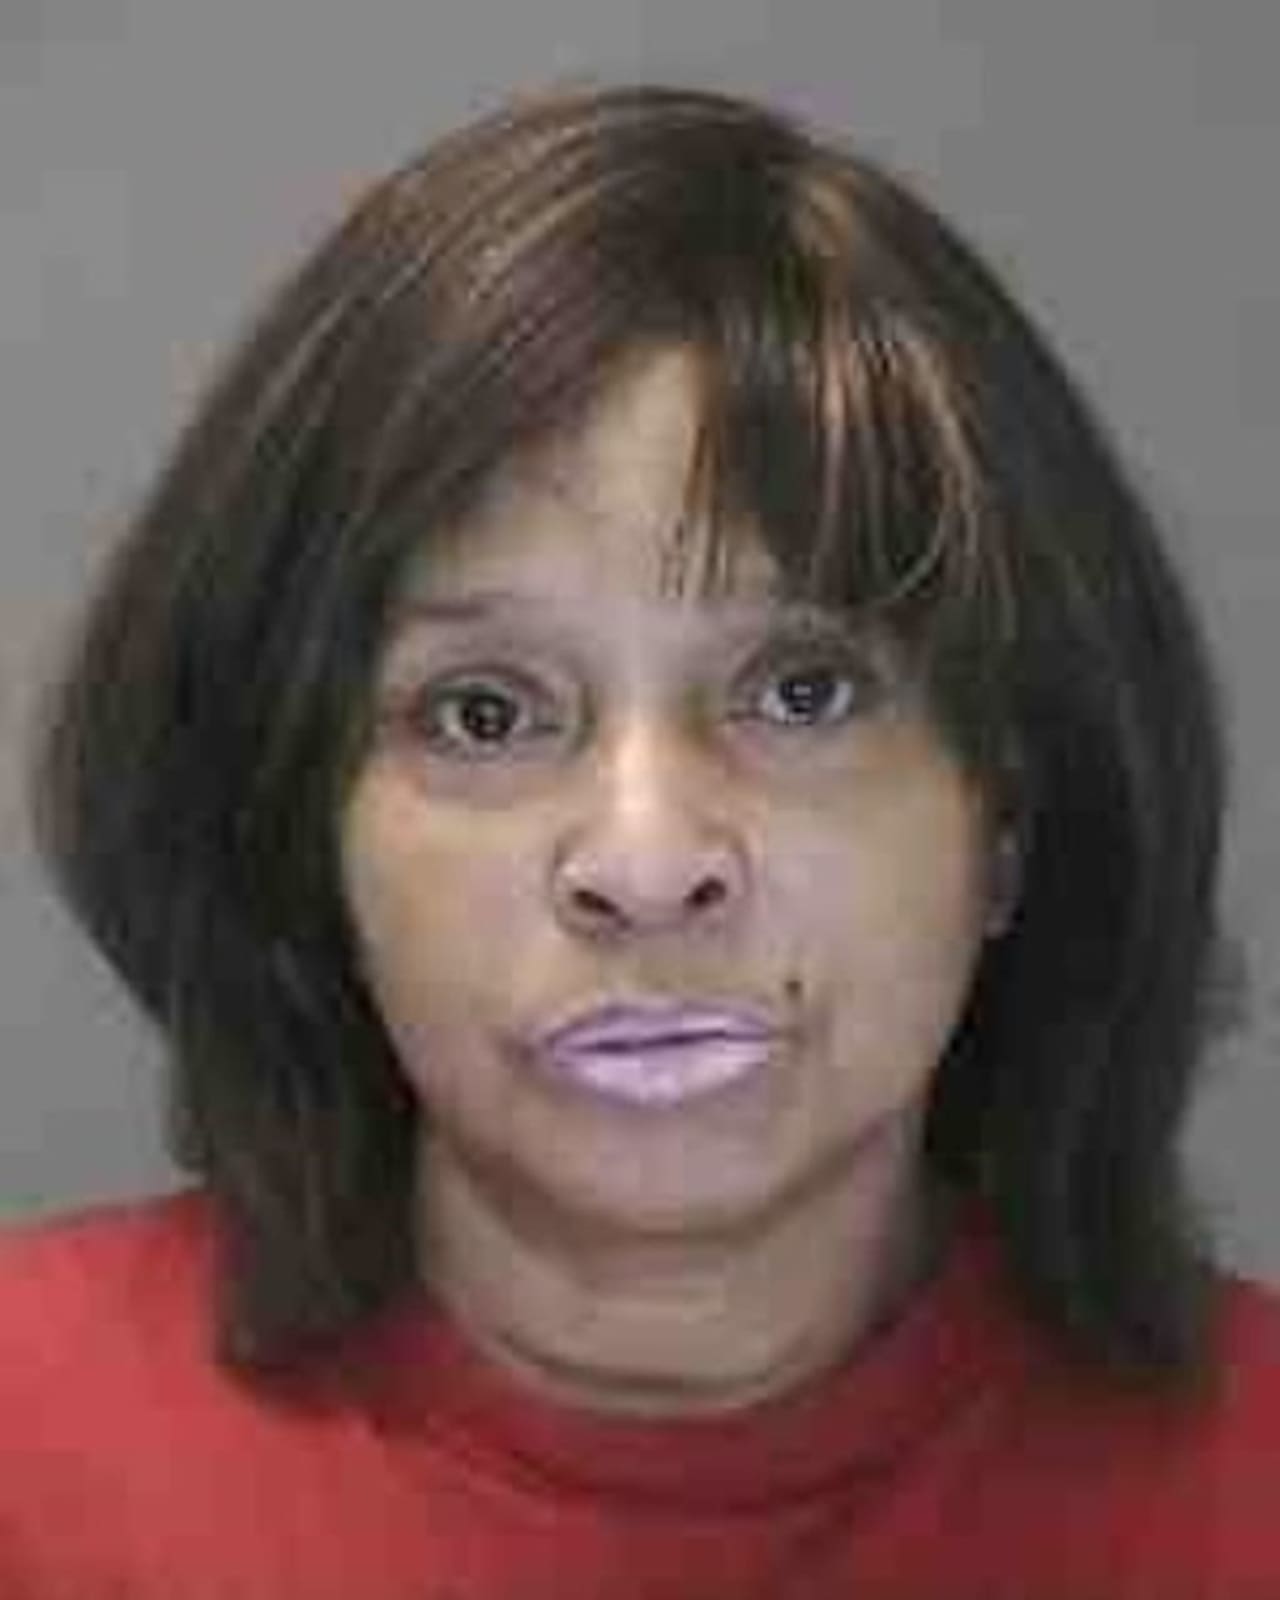 Renee L. Dalton is wanted by Ramapo police in connection with a 2012 petty larceny.